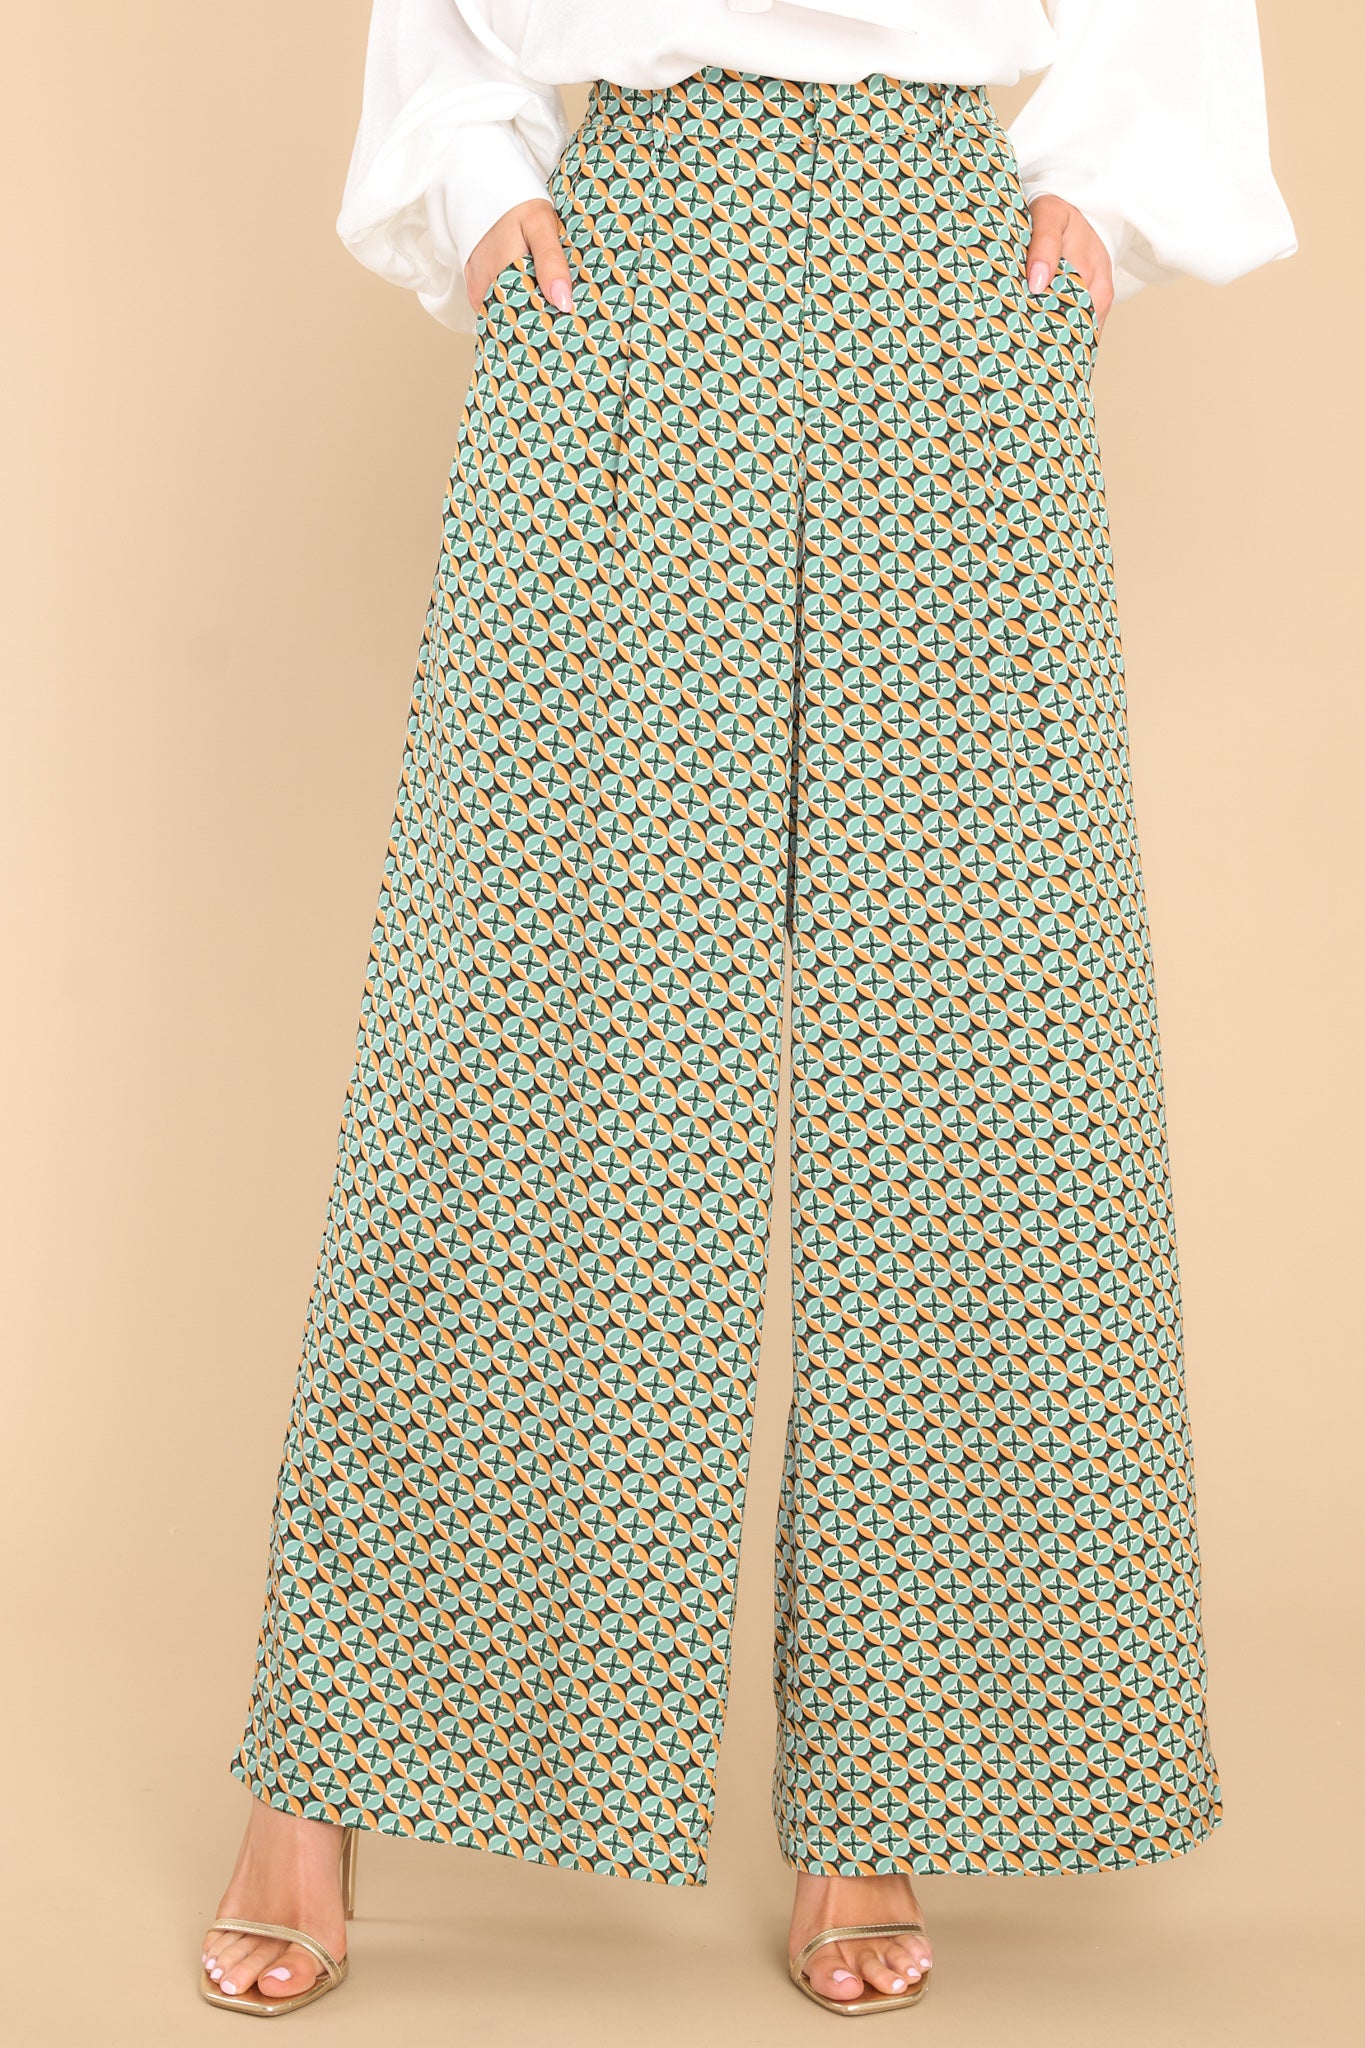 These seafoam green pants feature a high waisted design, a wide leg, a zipper with a hook and bar closure, belt loops, functional pockets, and front pleats.